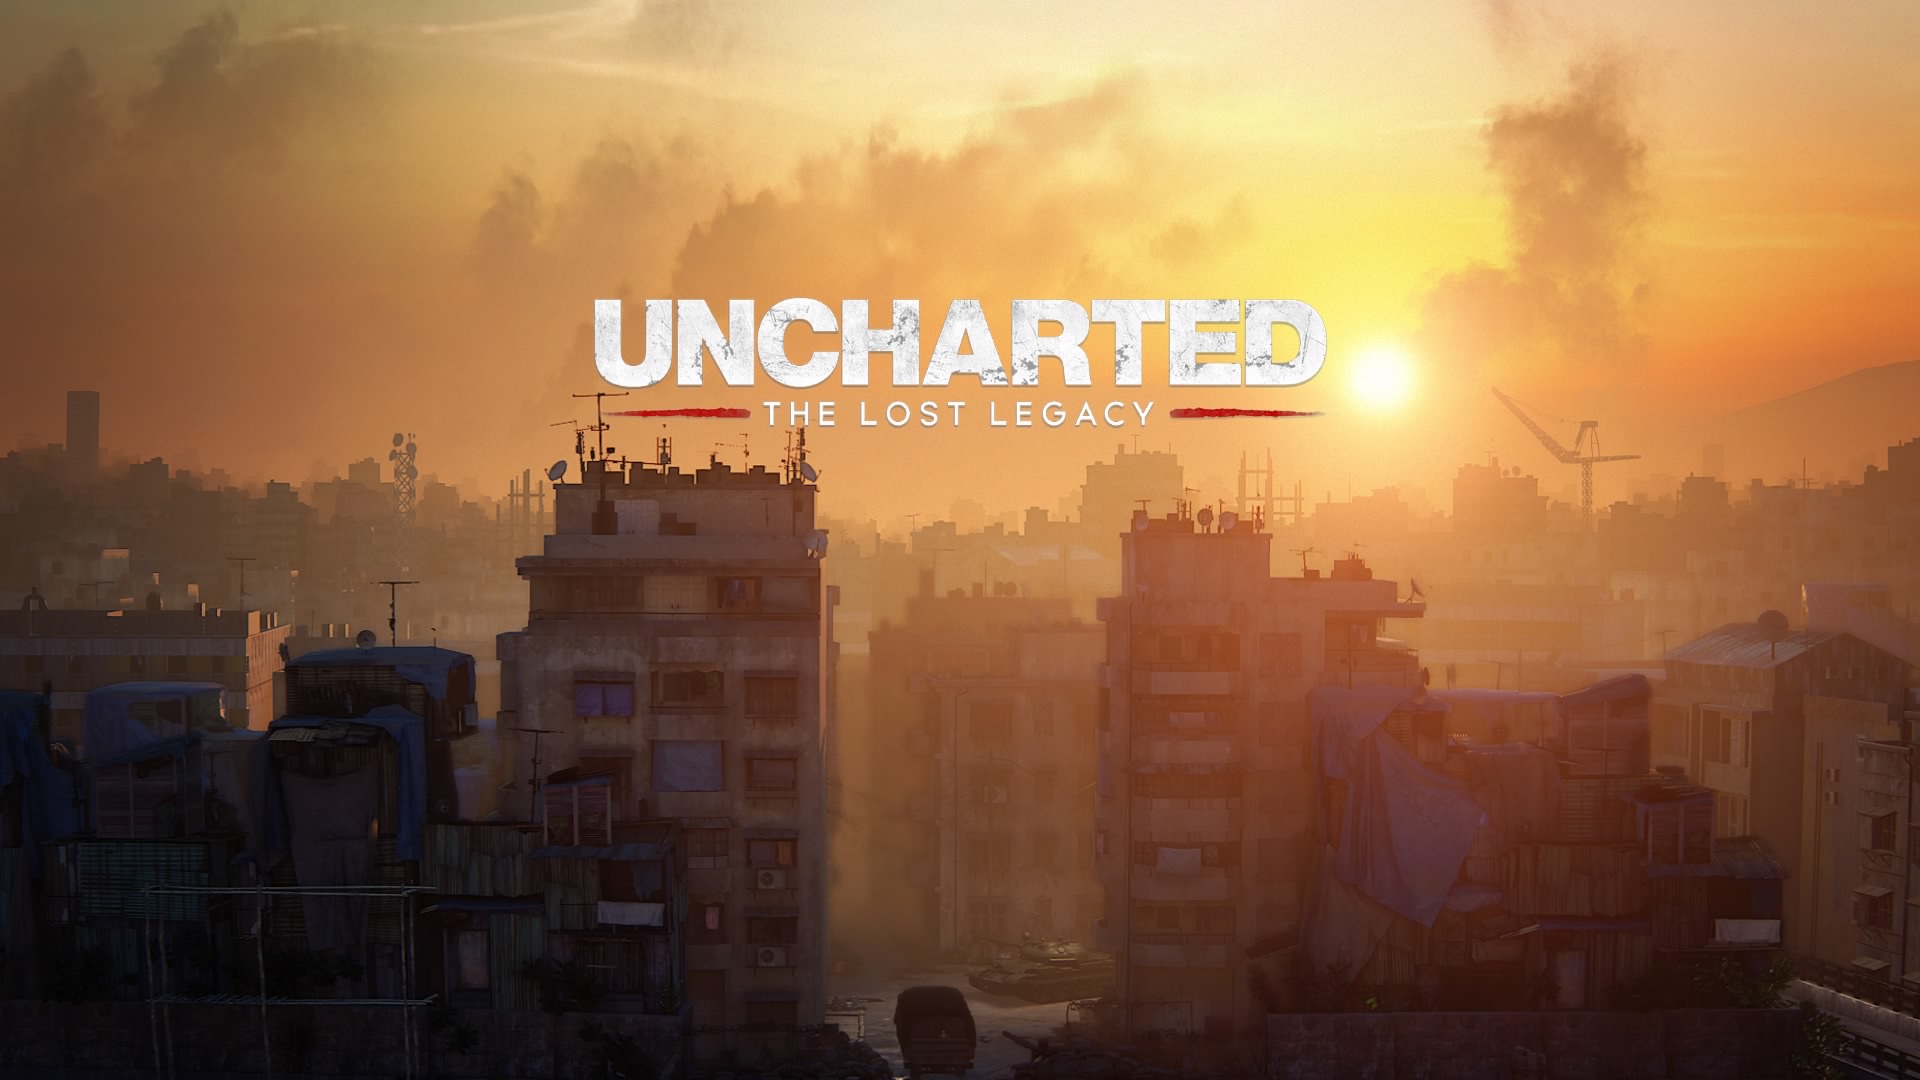 Uncharted The Lost Legacy Uncharted Video Games Video Game Art Cityscape Sky Sunlight 1920x1080